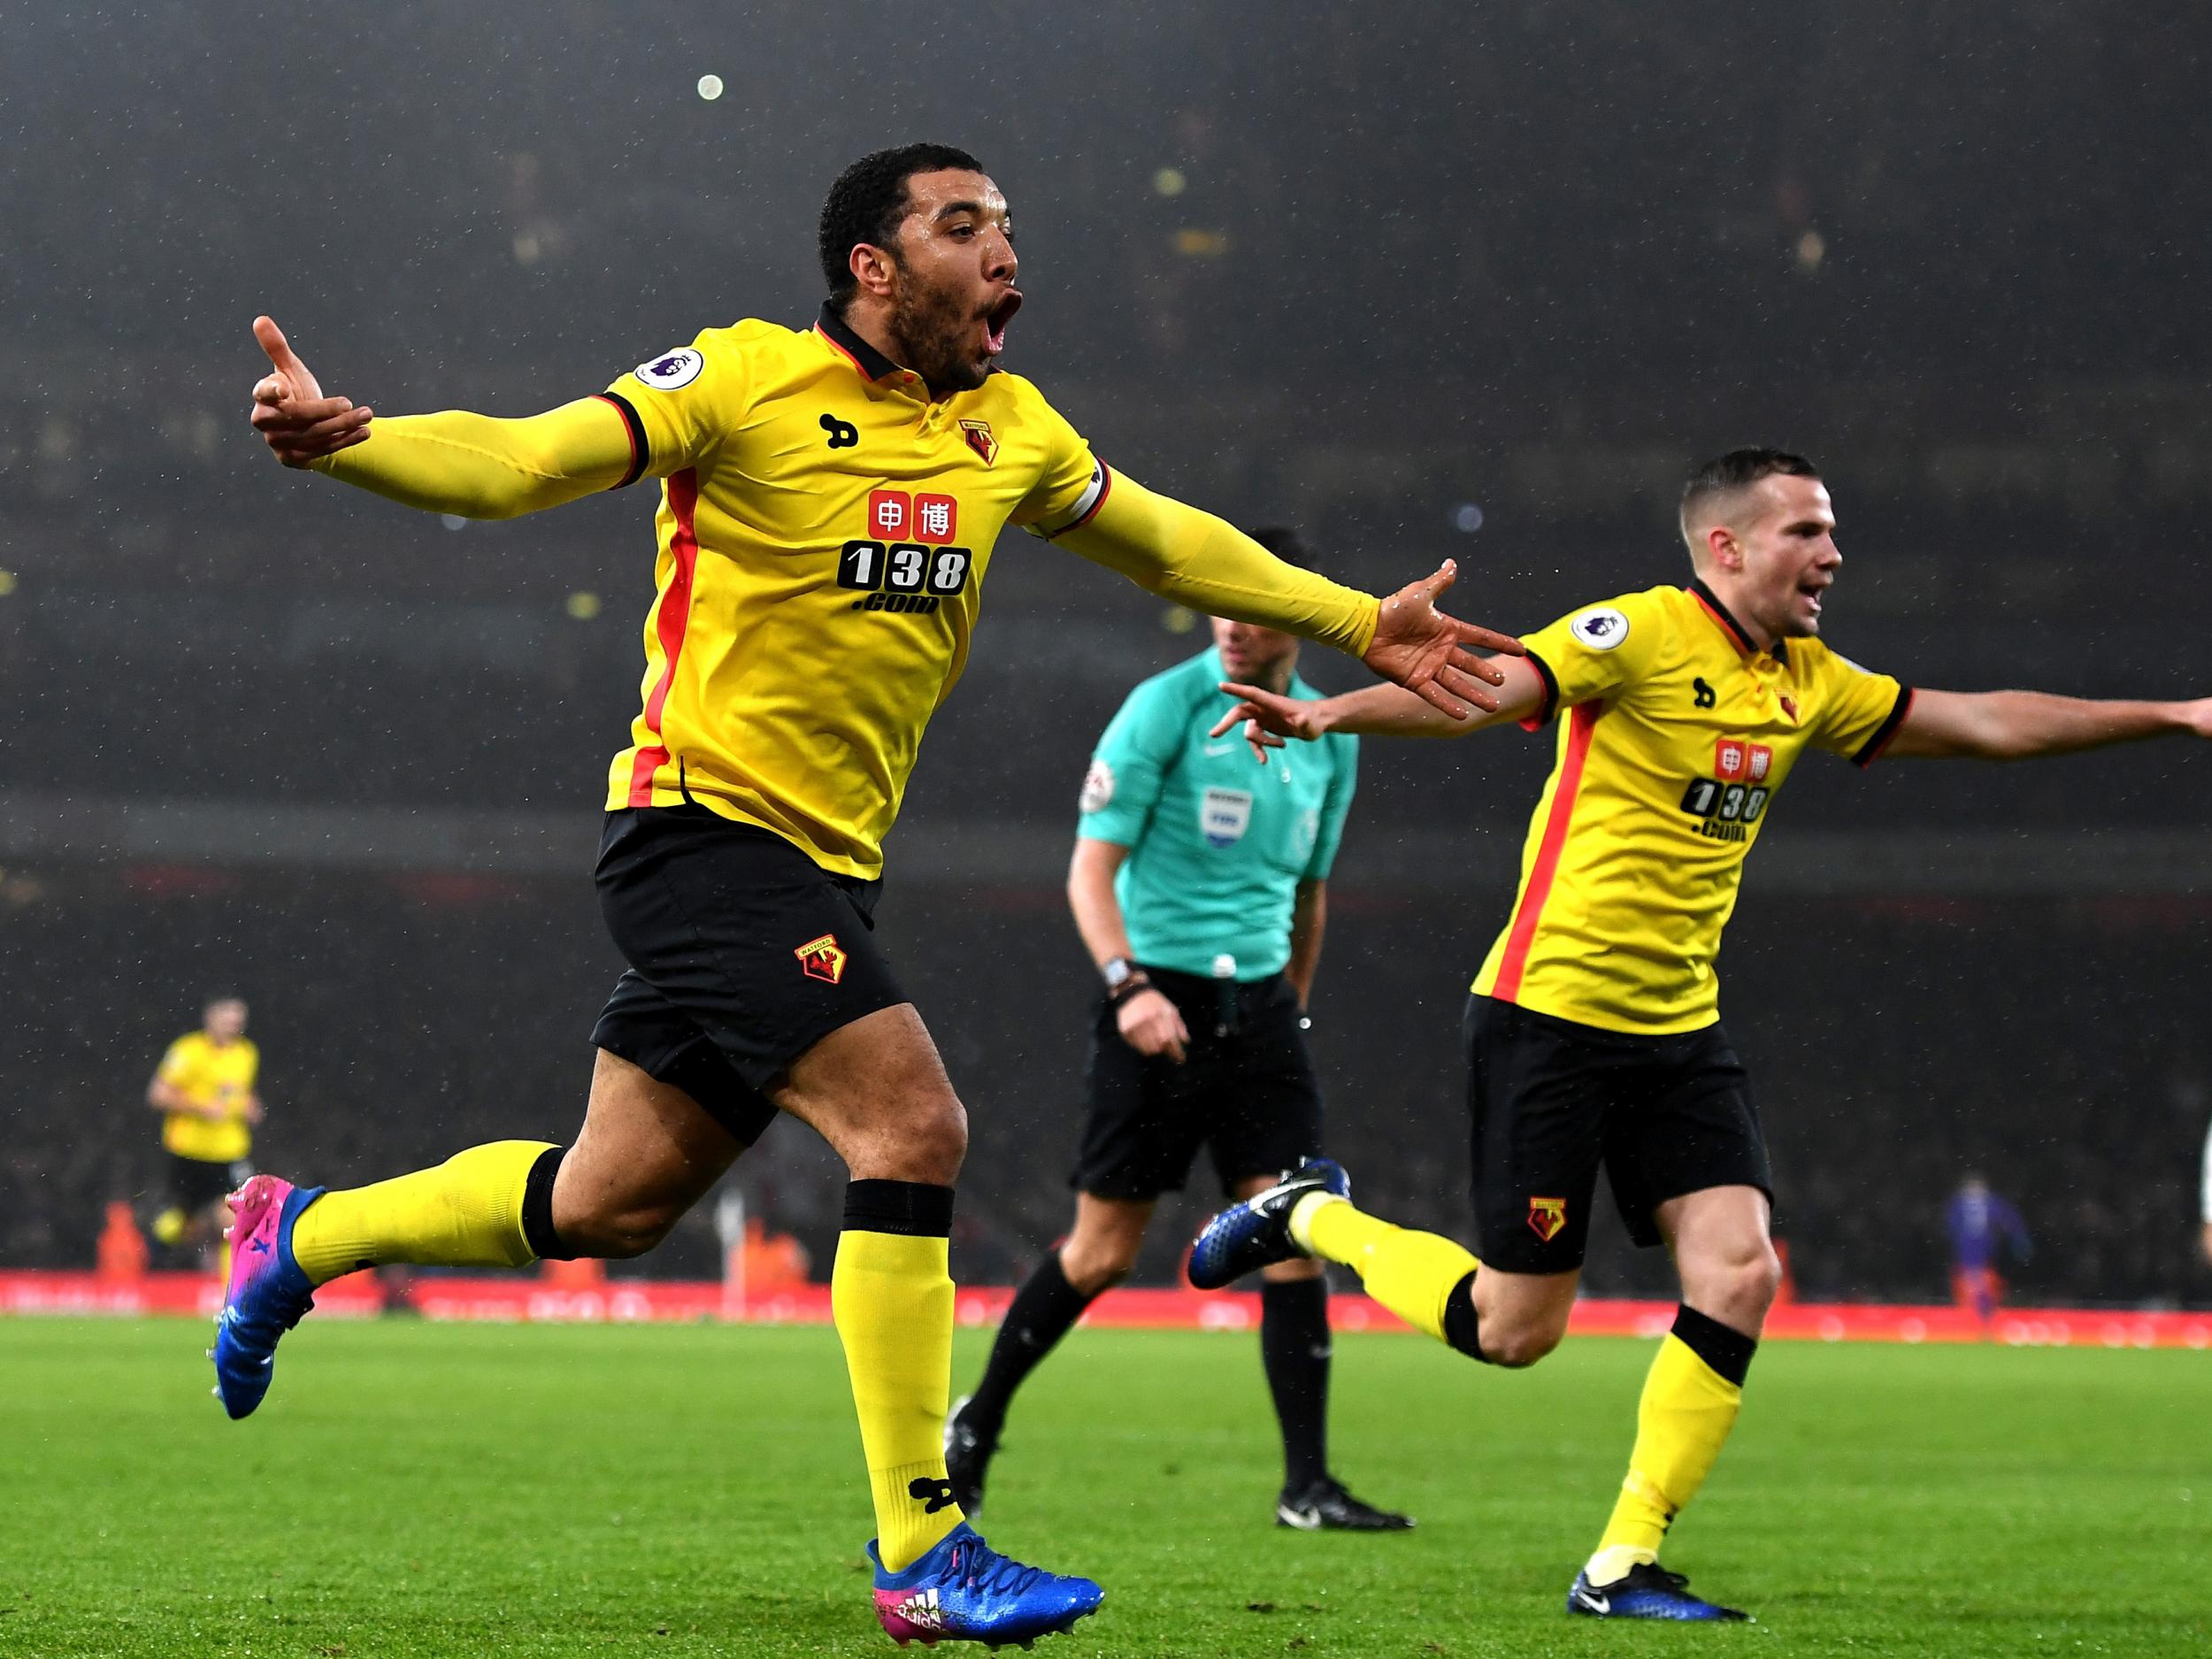 Watford will be hoping to improve on last season's disappointing finish